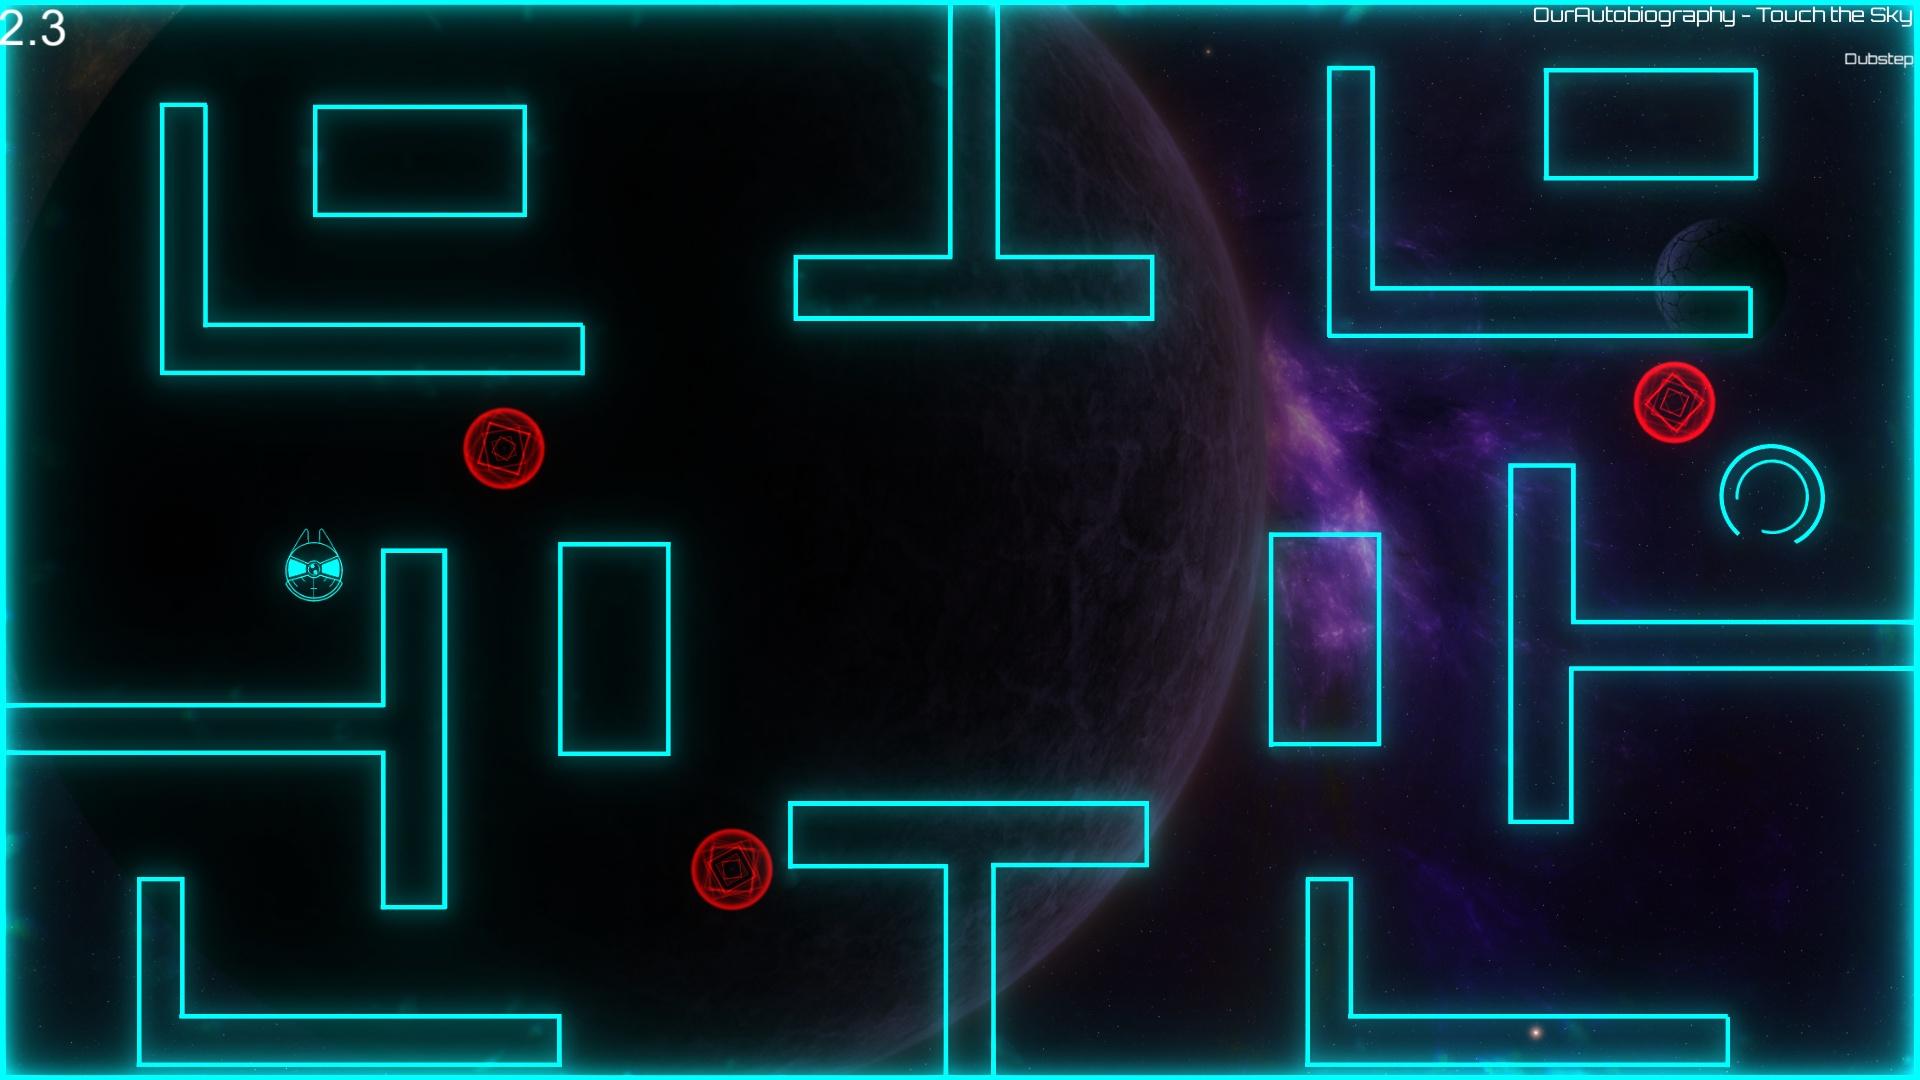 Screenshot №2 from game Neon Space 2